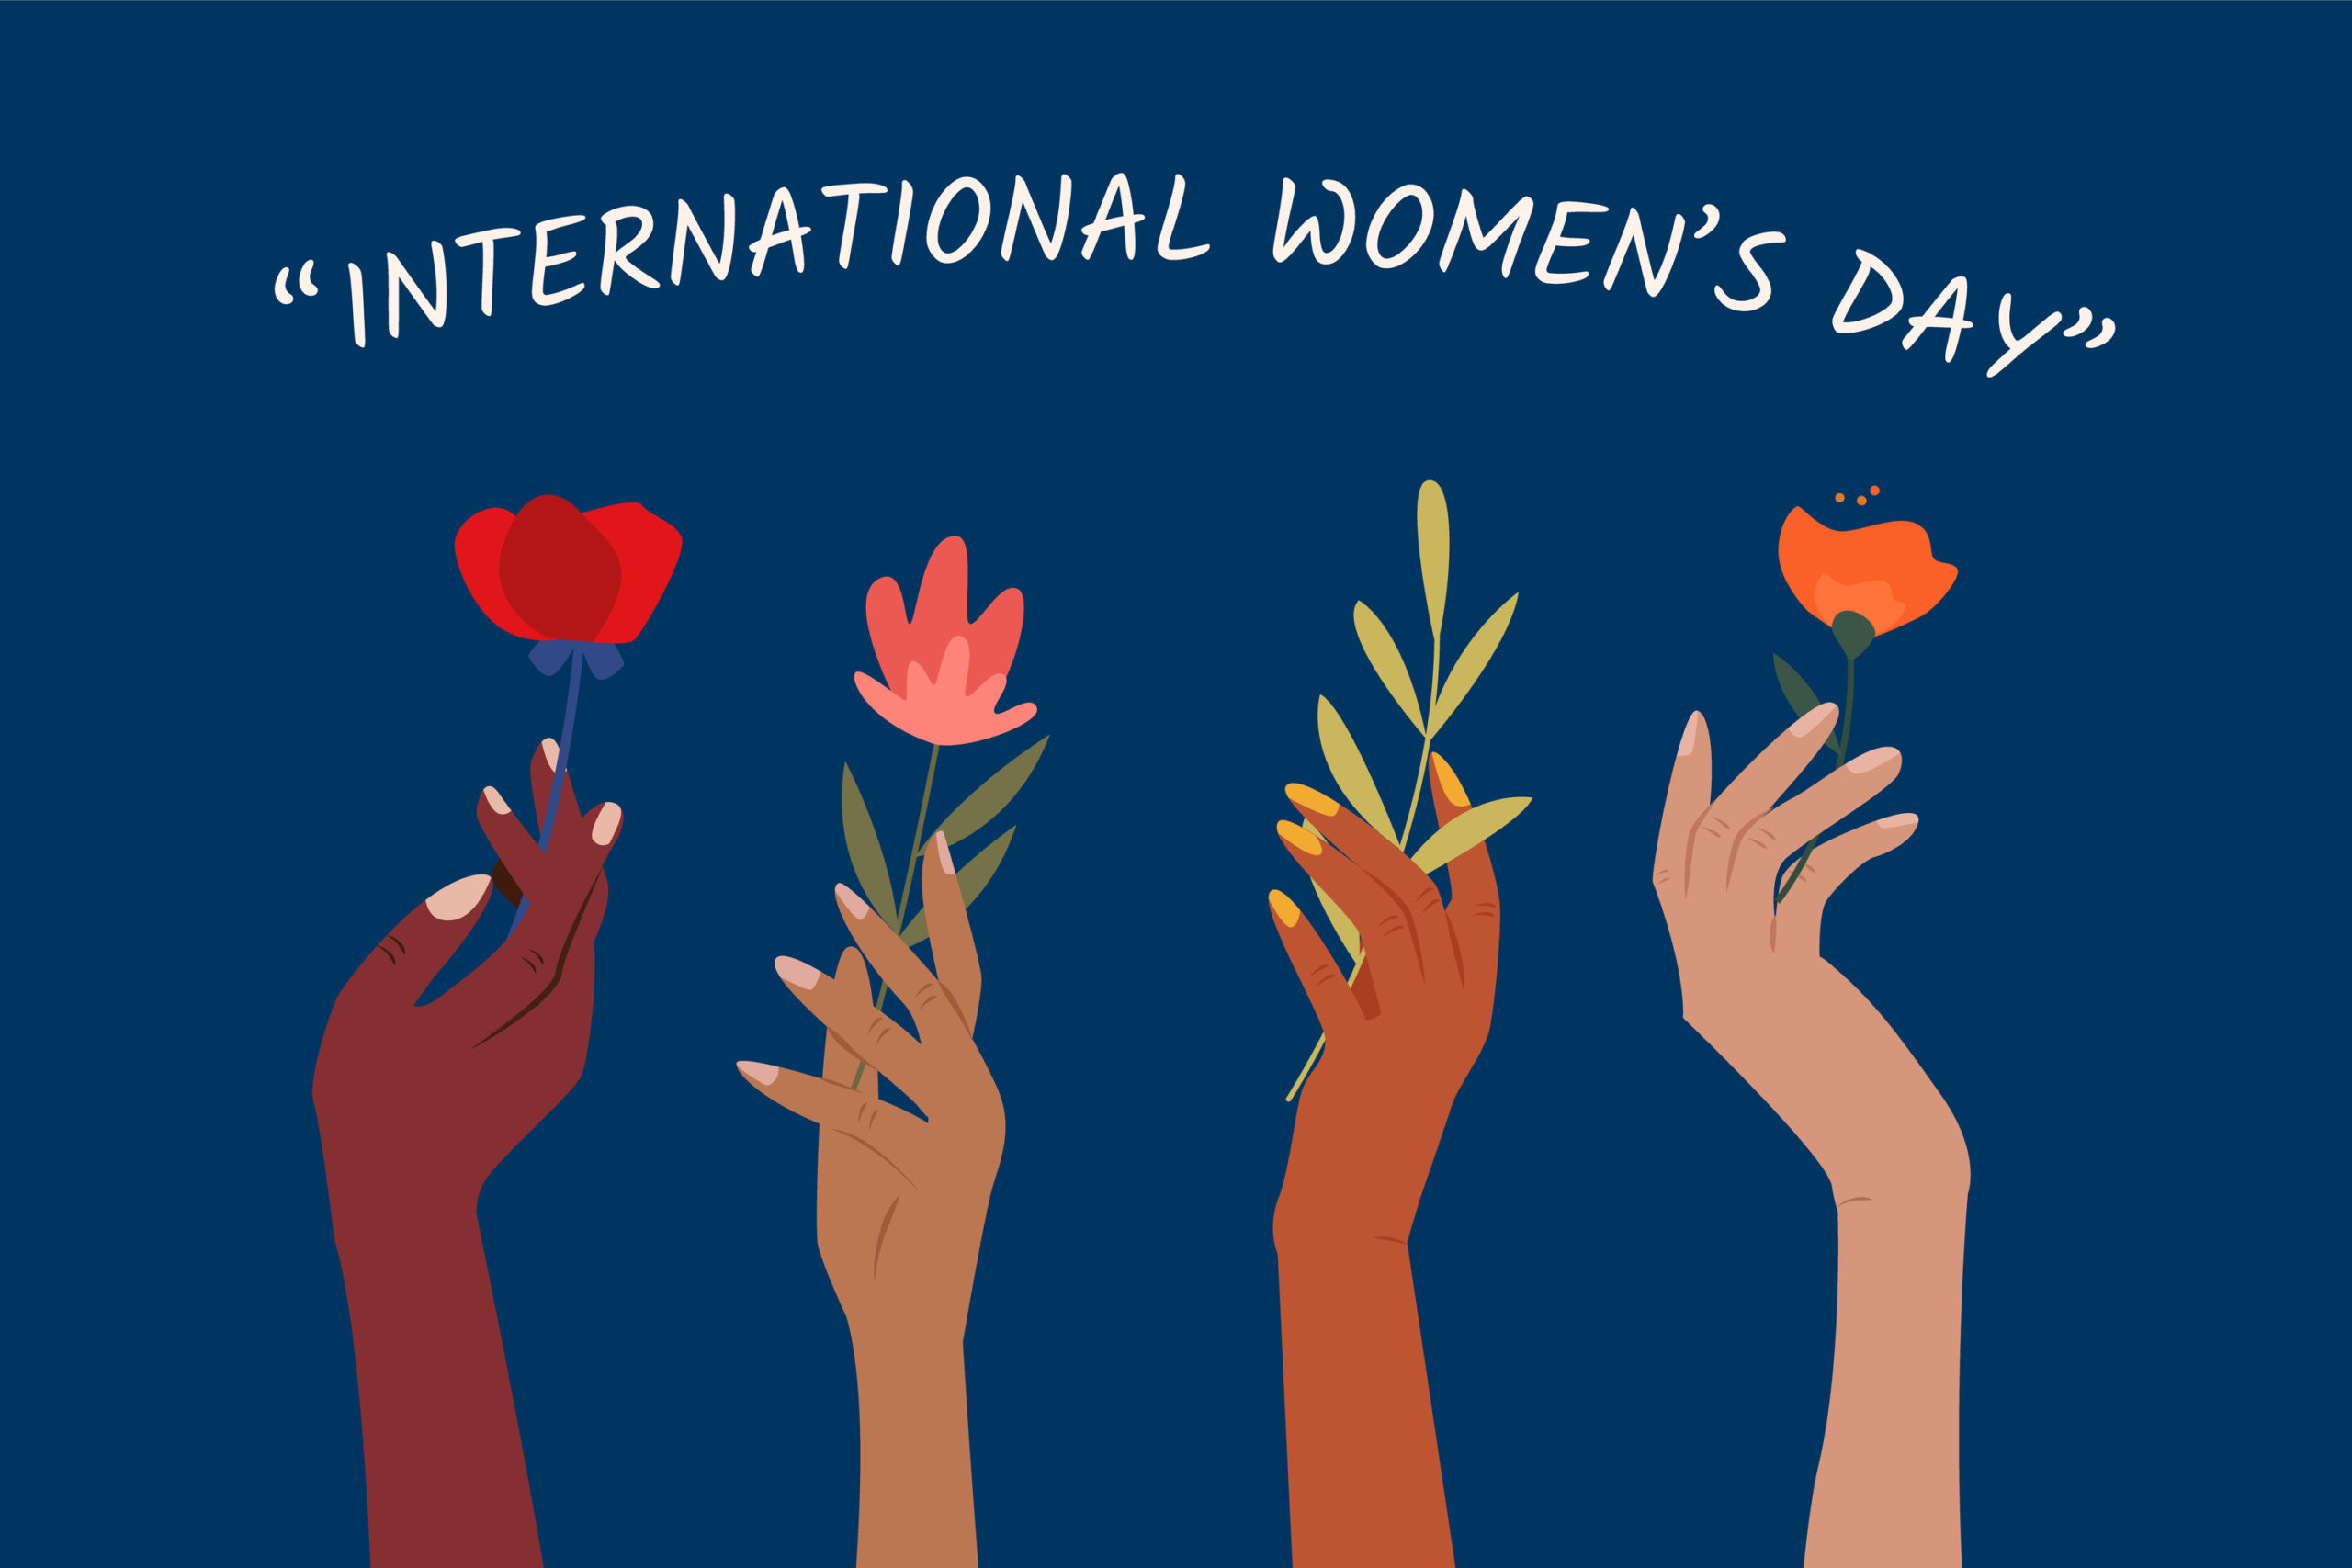  Four women of different ethnicities celebrate International Women's Day by holding flowers in their hands.